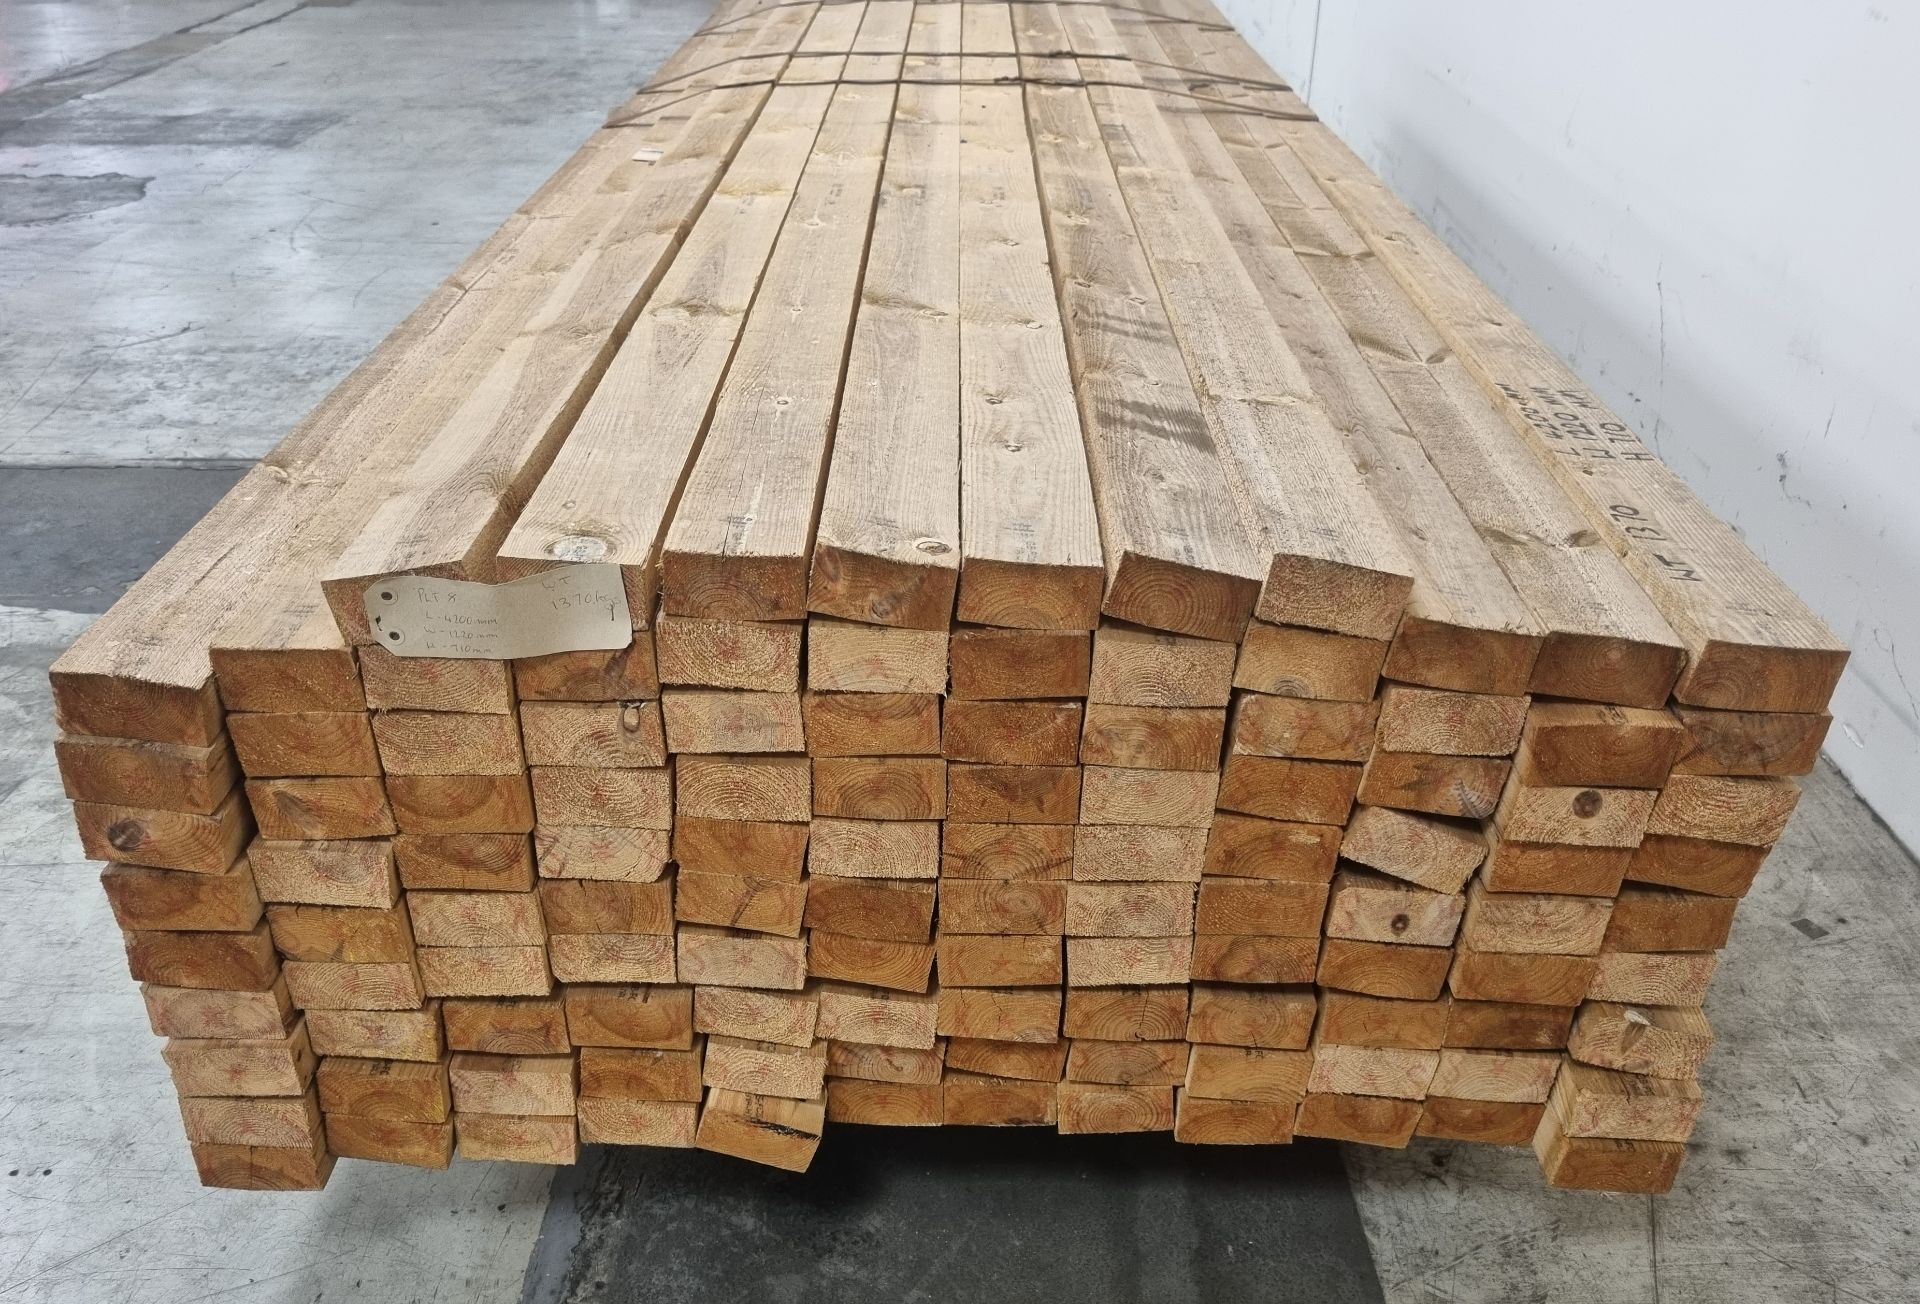 Pallet of 4"x2" (10x5cm) softwood, heat treated and debarked (GBFC-0452 DBHT) - L420cm - 115 pcs - Image 4 of 5